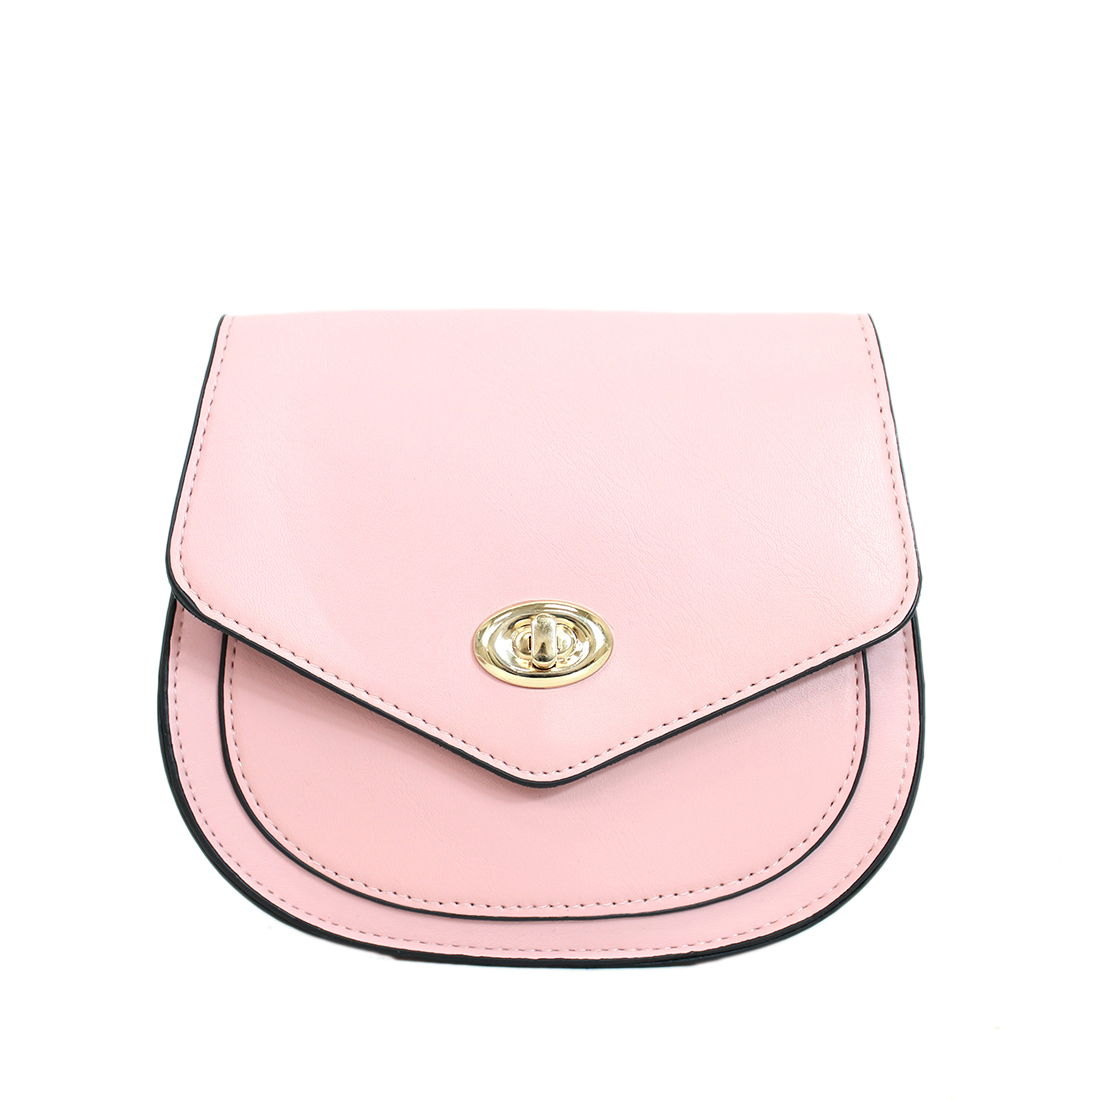 Plain with small gold clasp on top and plain strap